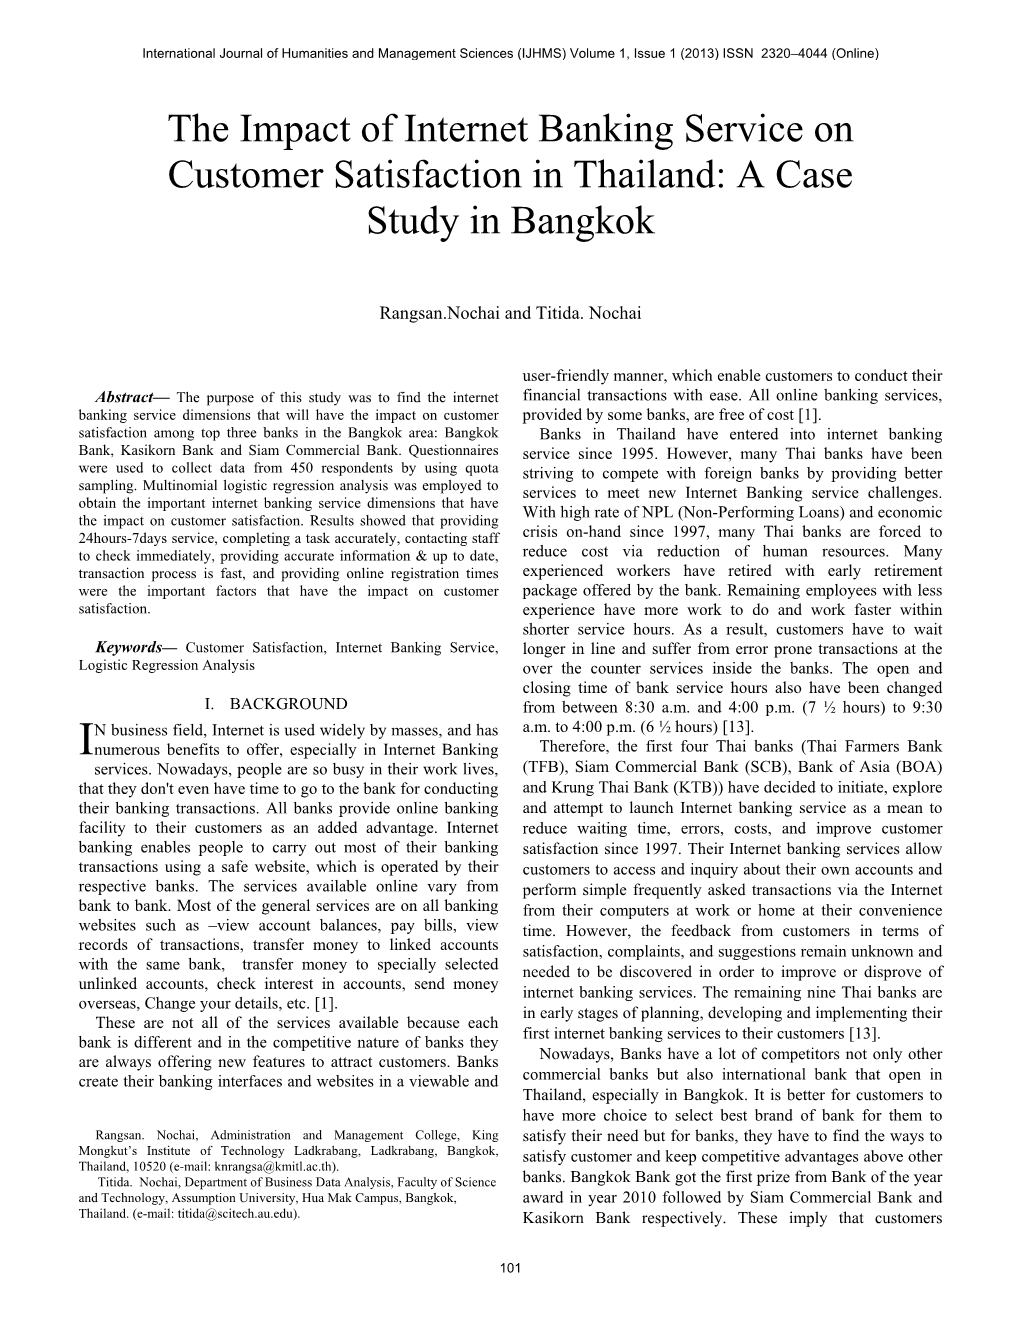 The Impact of Internet Banking Service on Customer Satisfaction in Thailand: a Case Study in Bangkok